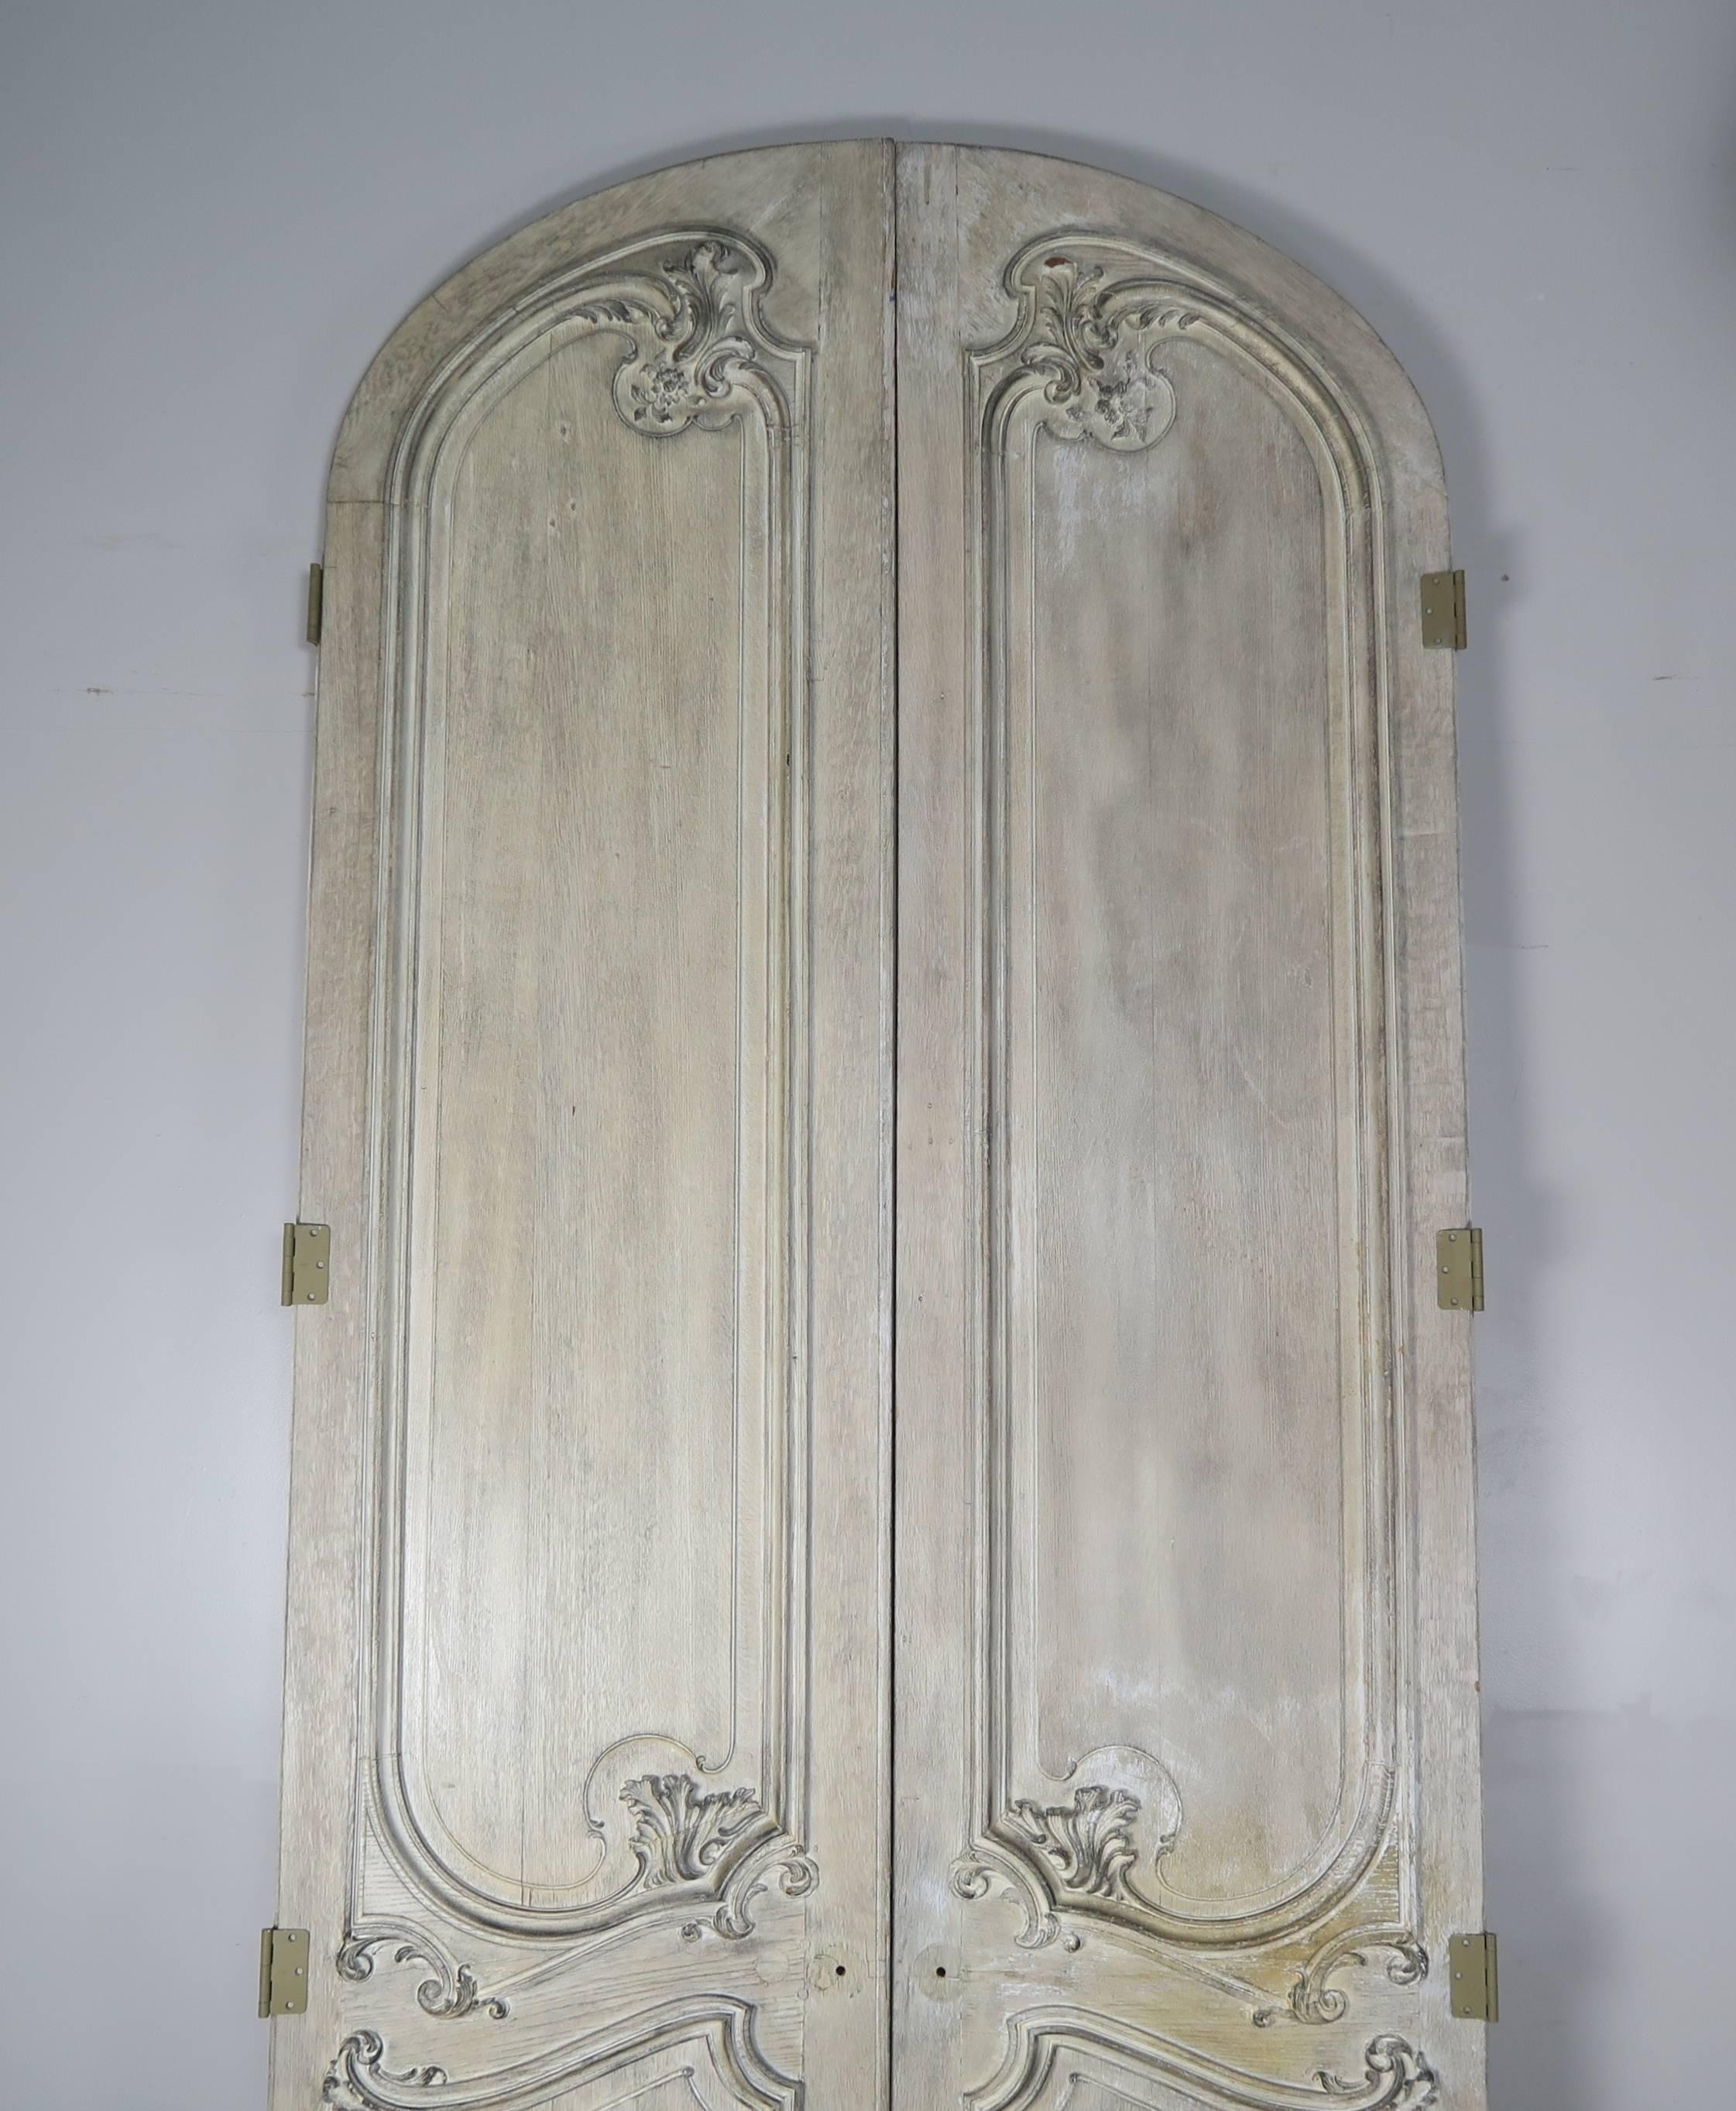 Pair of monumental French carved arched Louis XV style doors with worn painted finish.